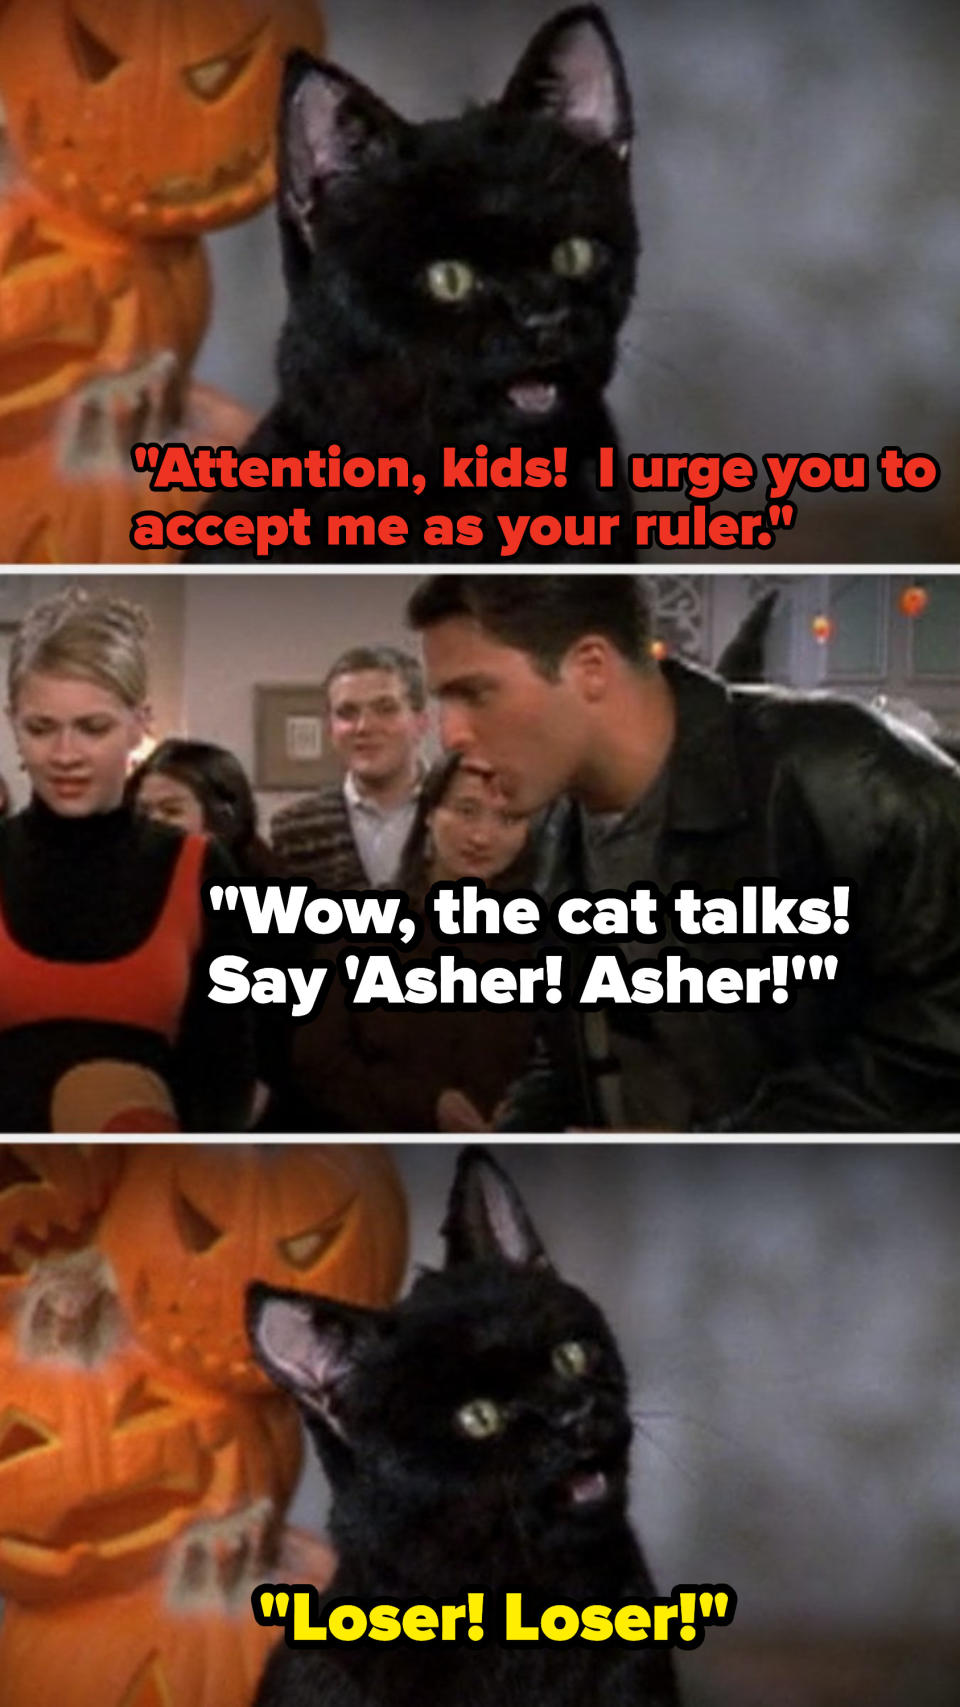 Salem teases a boy attending Sabrina's party, Asher, and calls him a loser